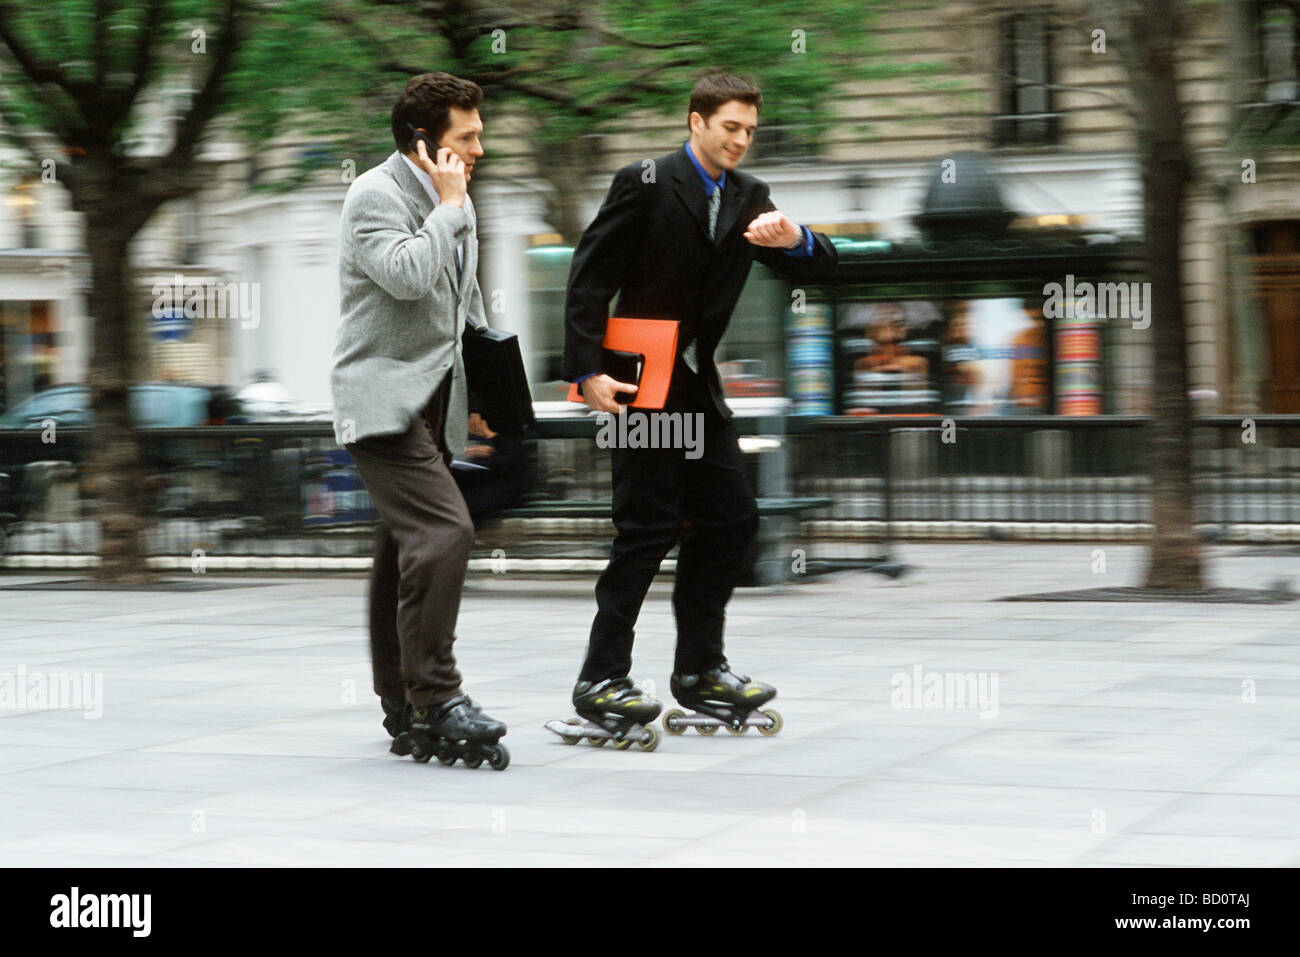 Men in business attire rollerskating together along sidewalk, one phoning, the other looking at watch Stock Photo